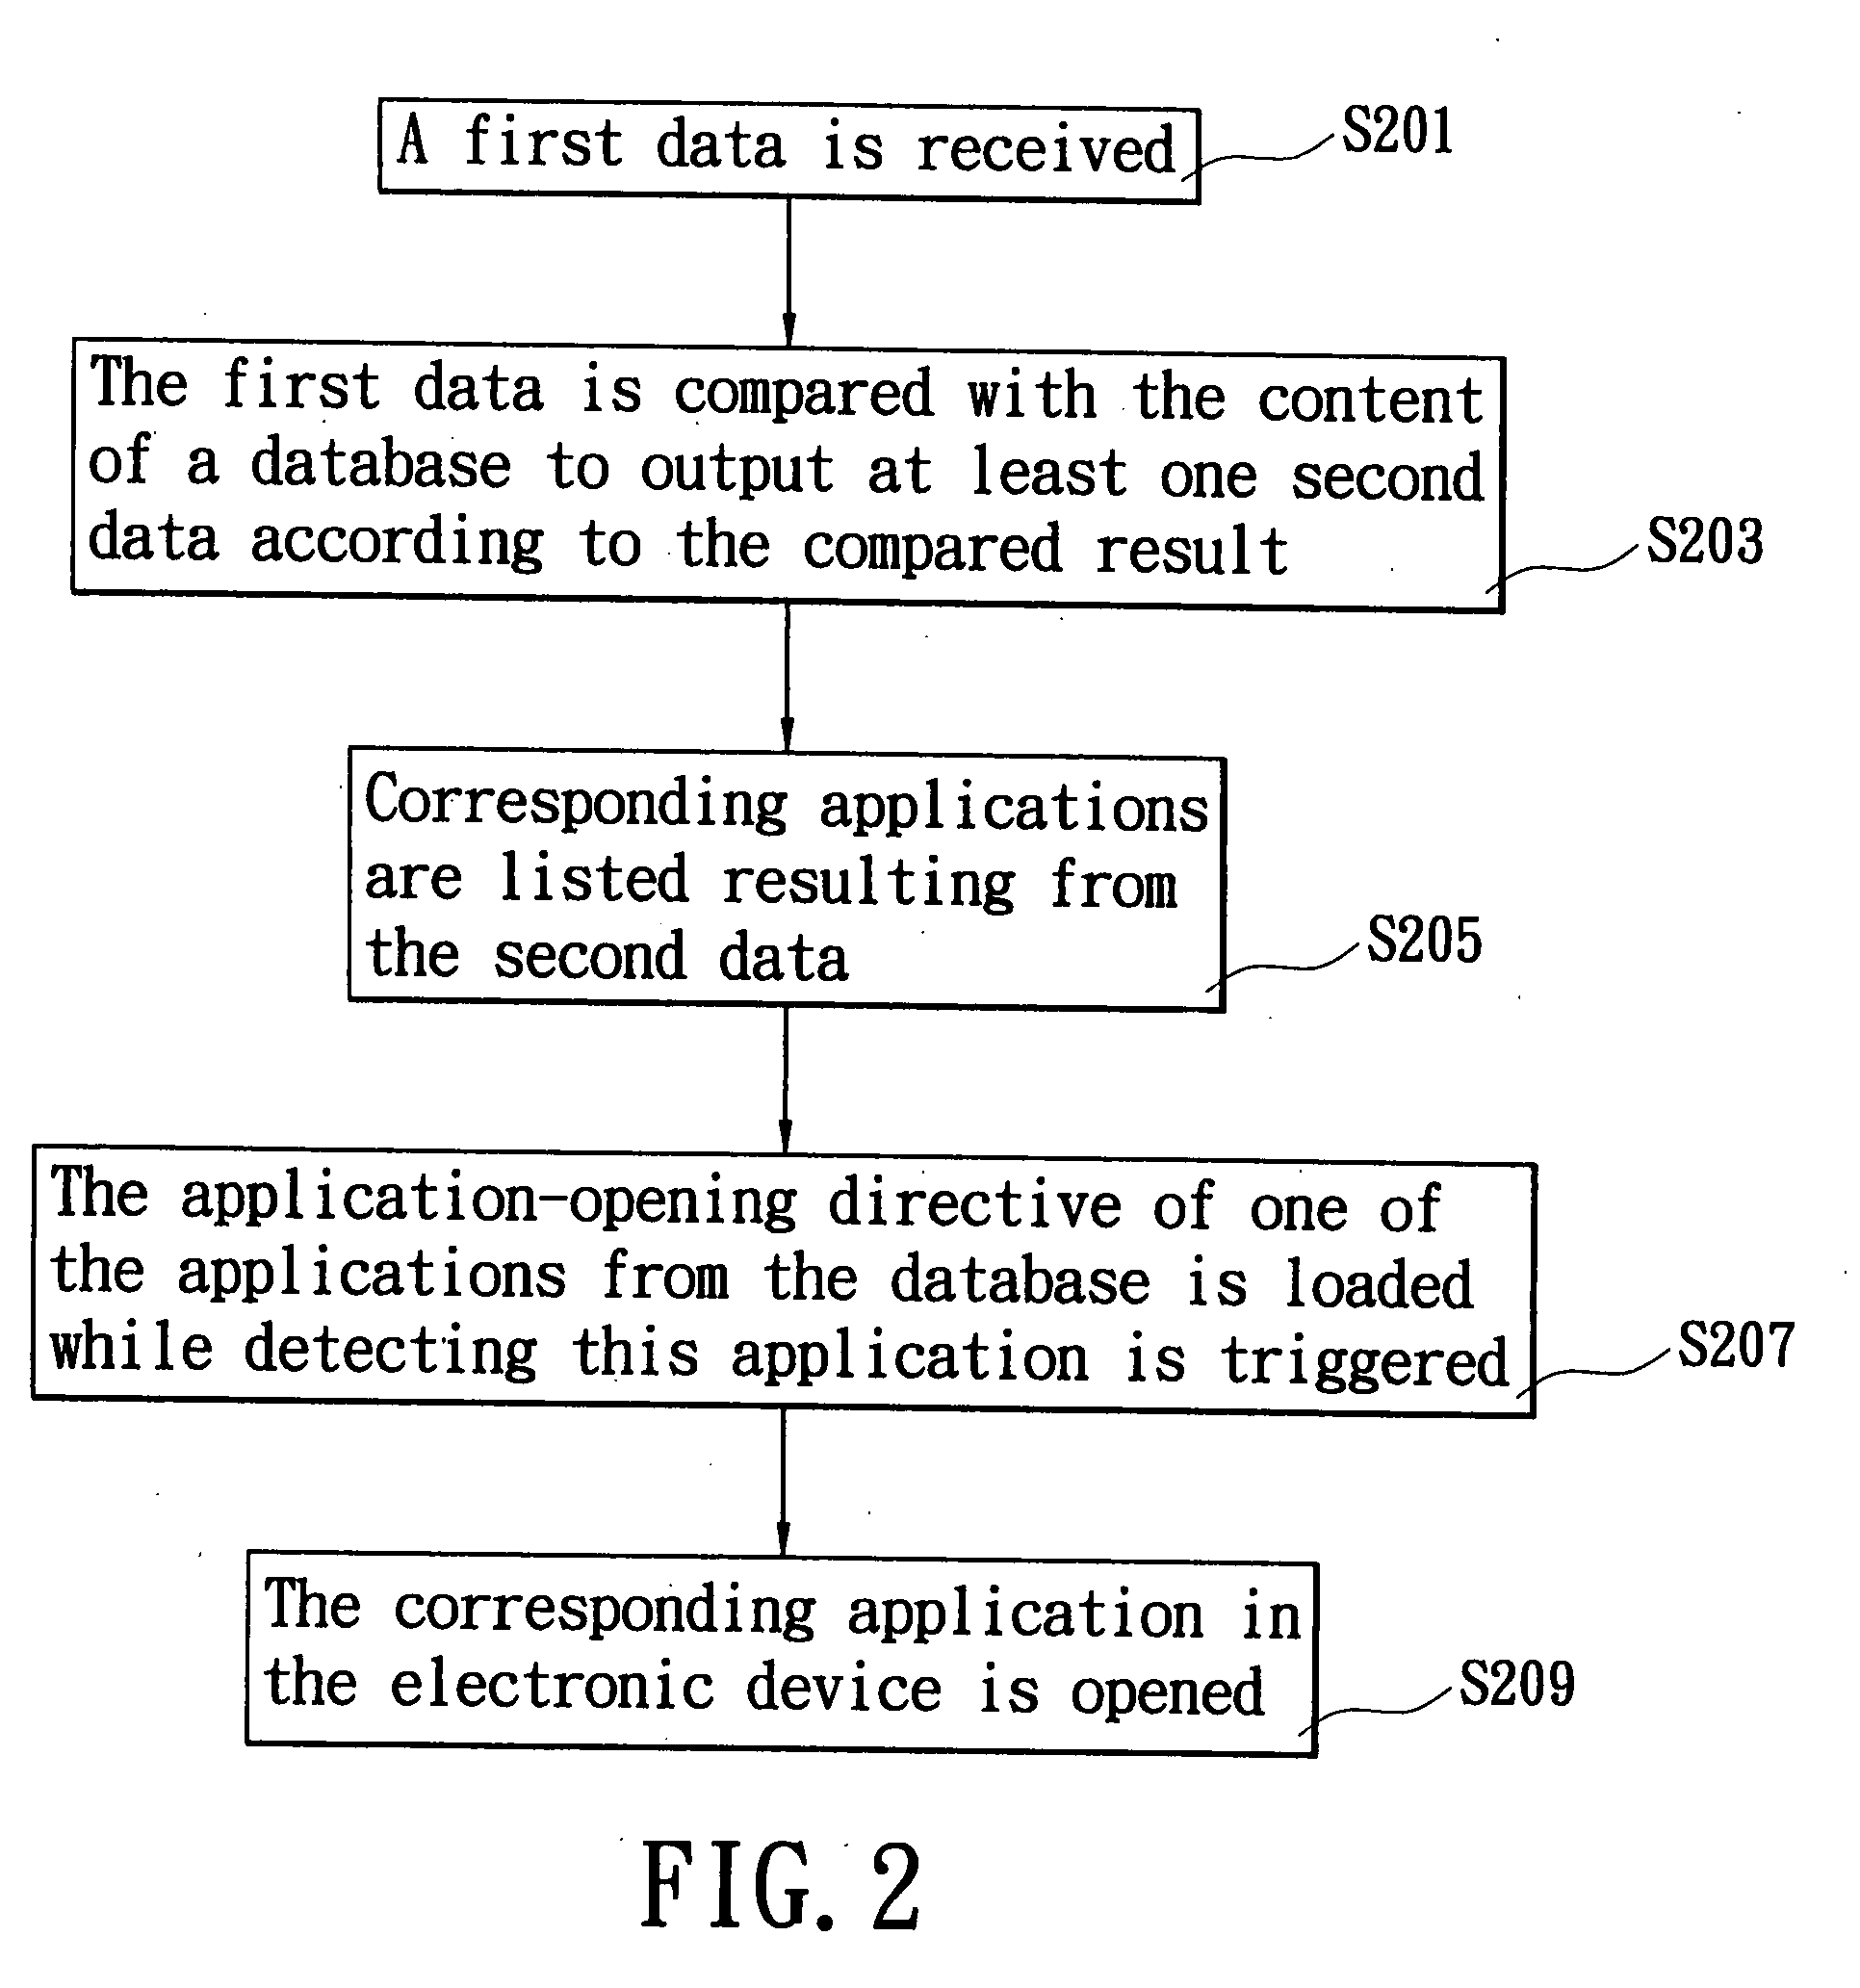 System and method for opening applications quickly